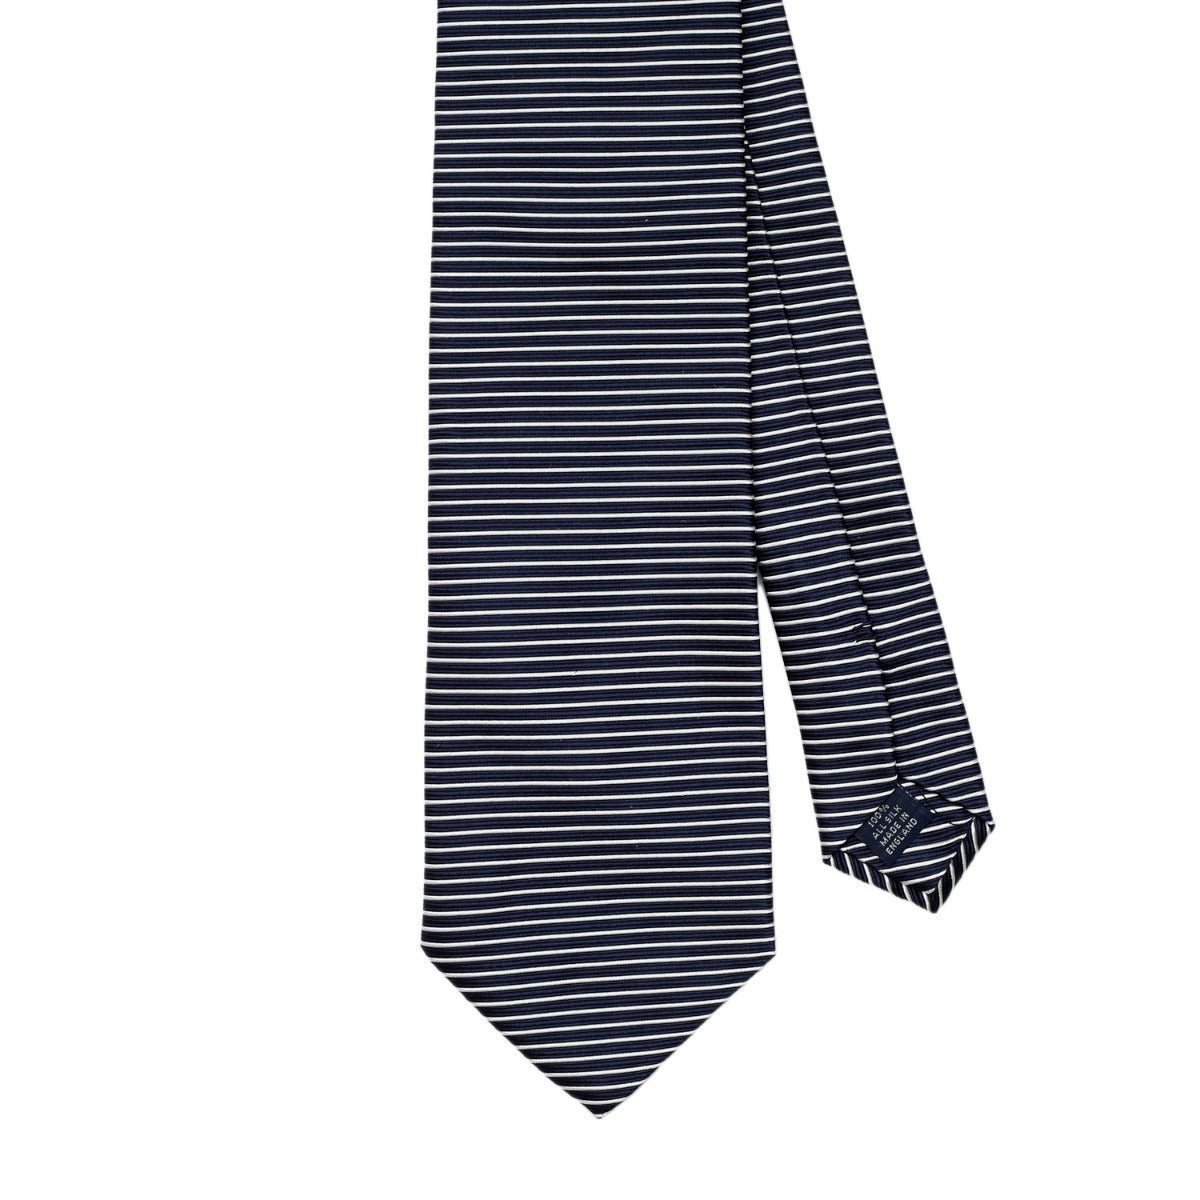 A Sovereign Grade Horizontal Stripe Jacquard Tie handmade in the United Kingdom, showcased on a white background, by KirbyAllison.com.